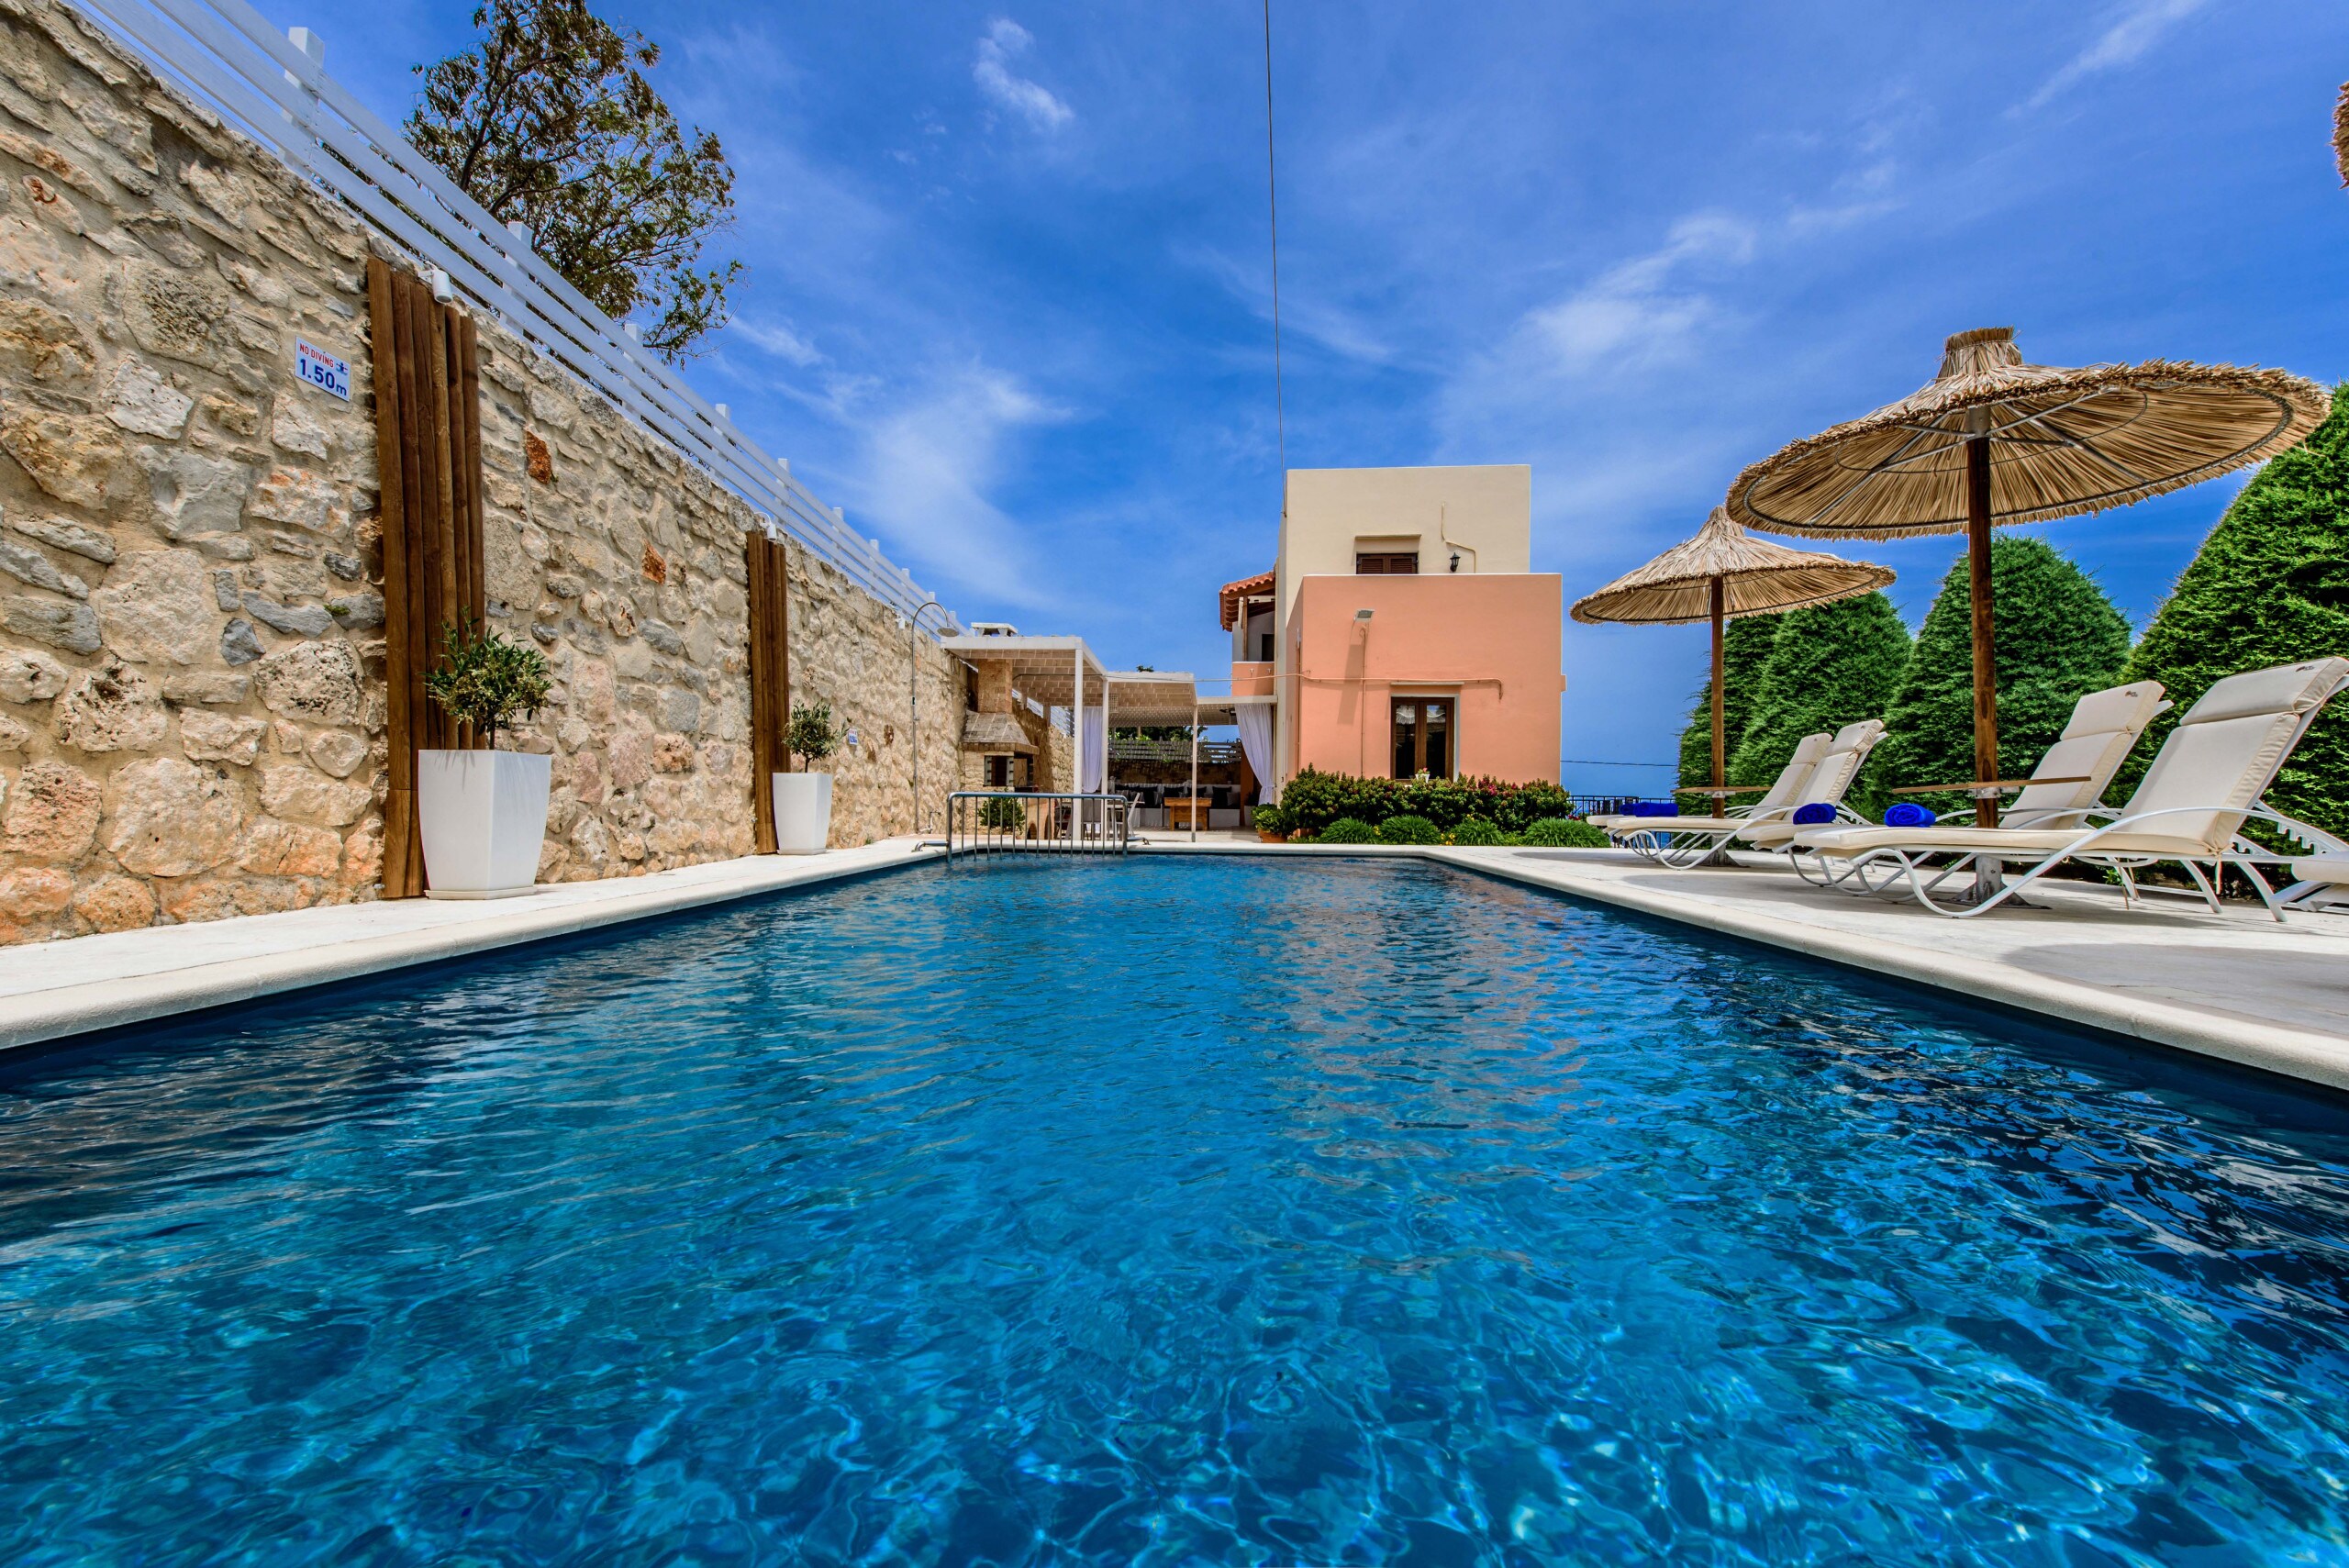 The terrace is complemented by a great private swimming pool